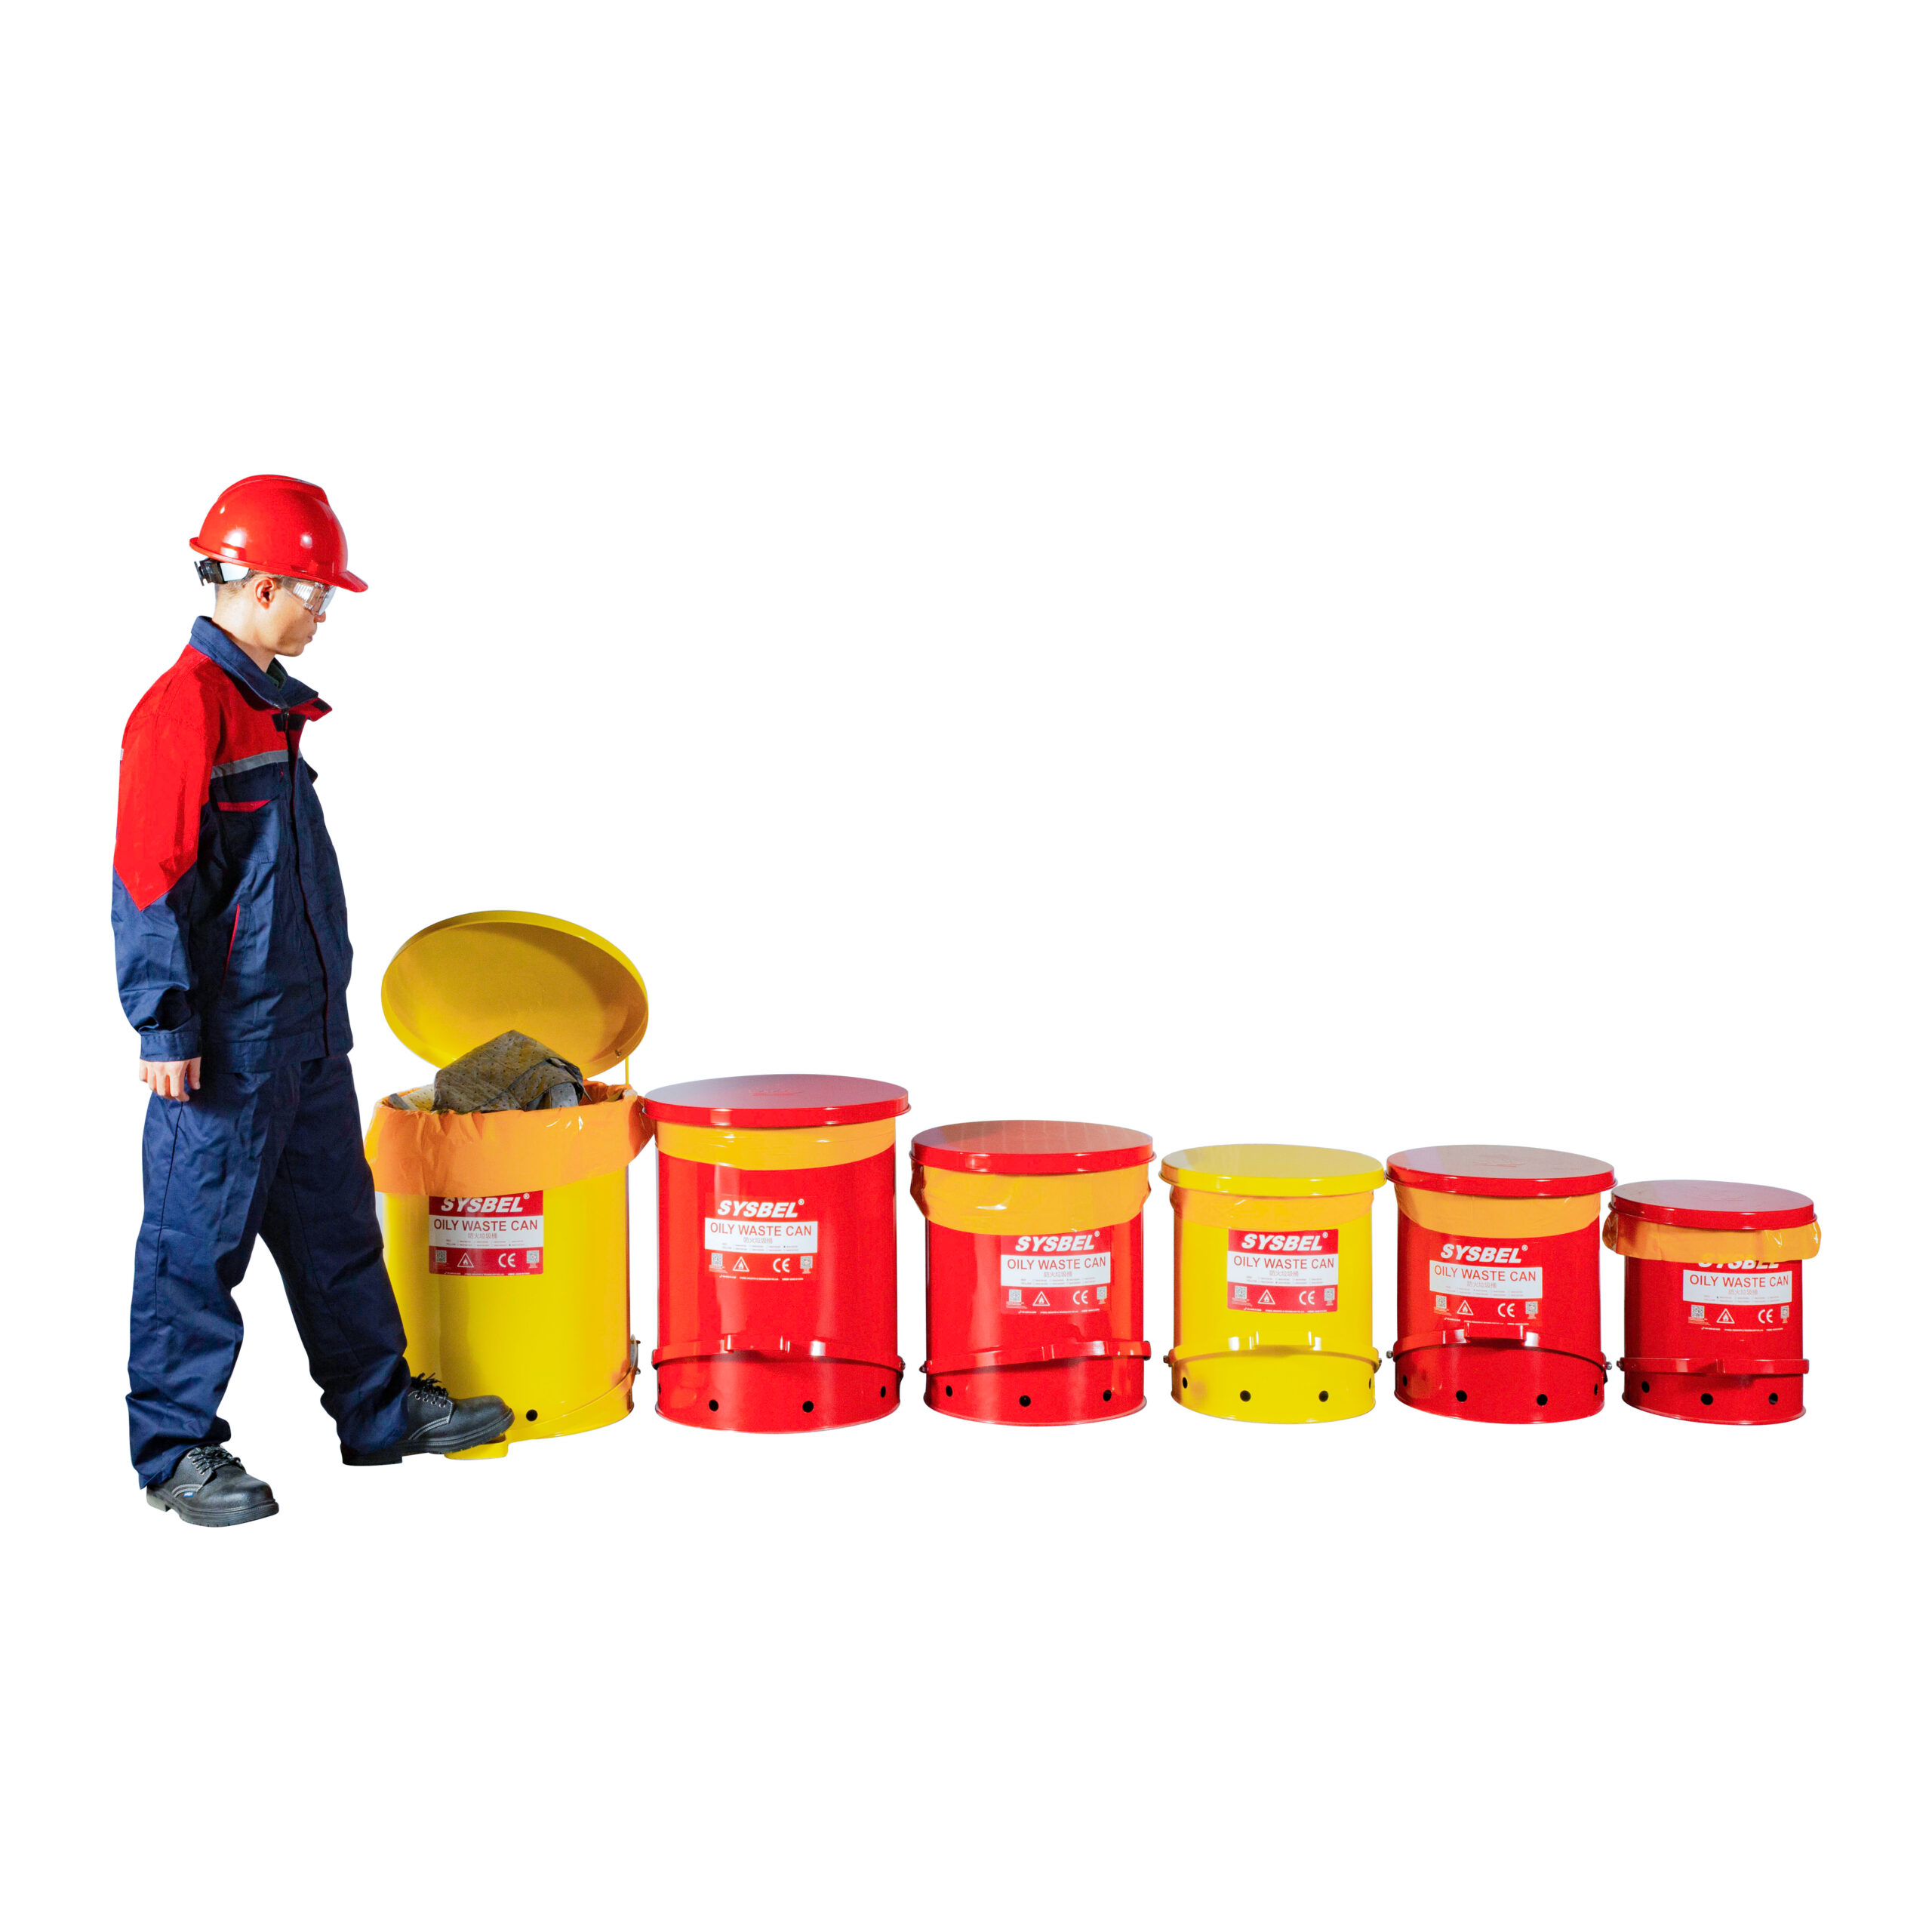 OSHA Standard 10 Gal Yellow Oily Waste Cans BD 3